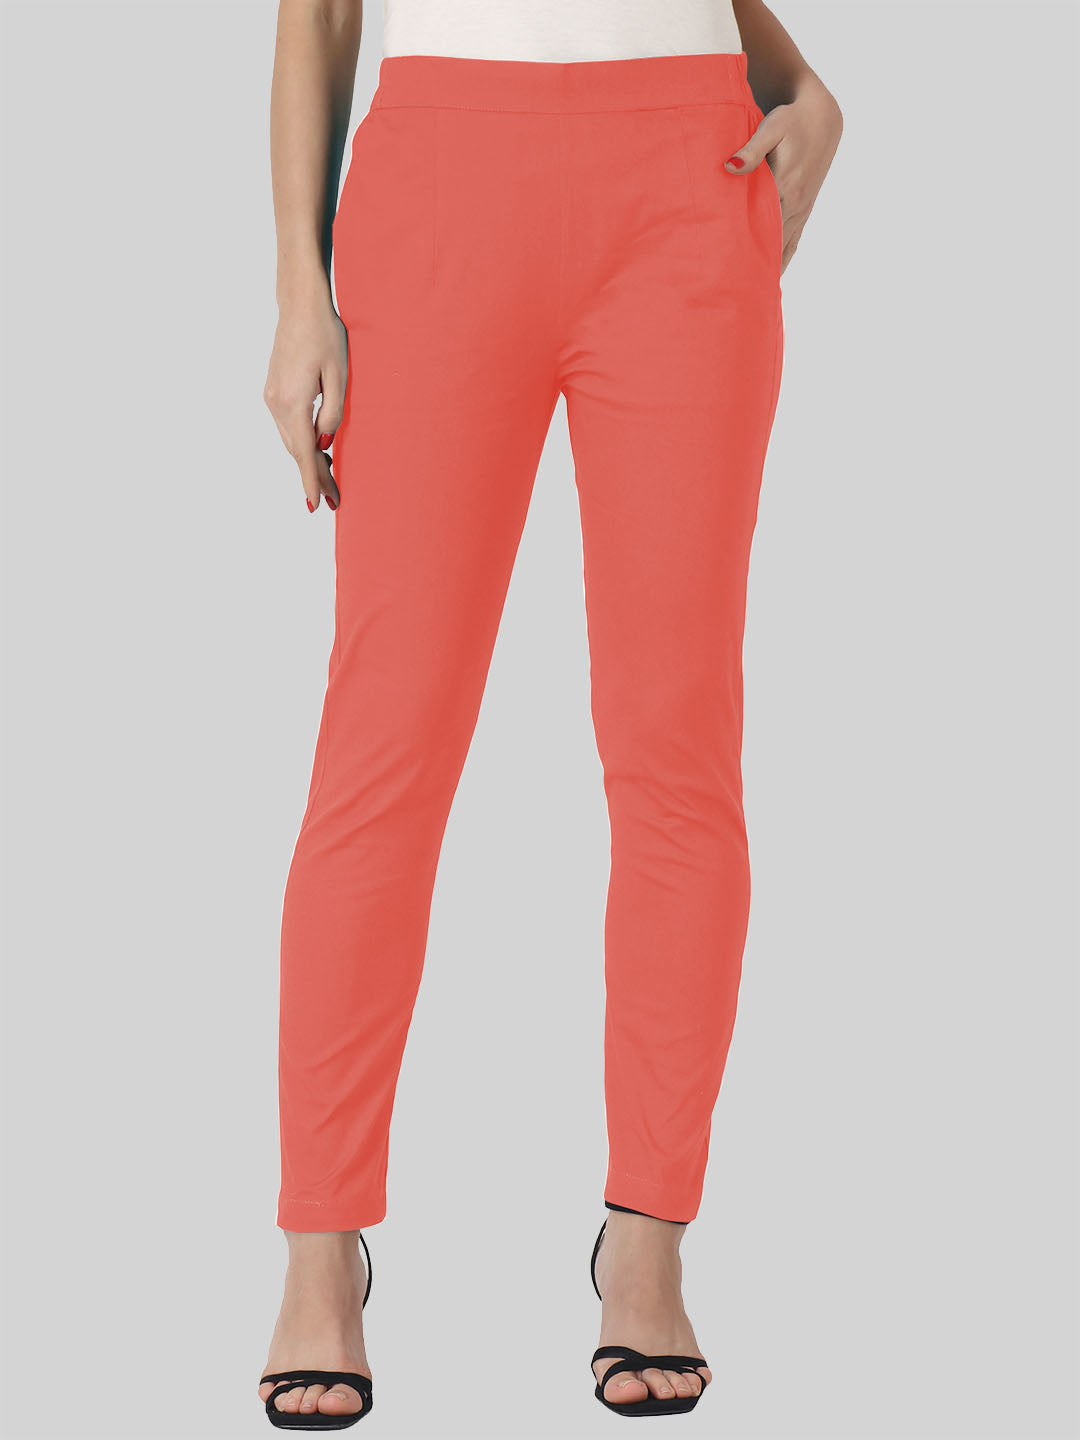 Saundarya Women's Coral Red Ankle Length Pants